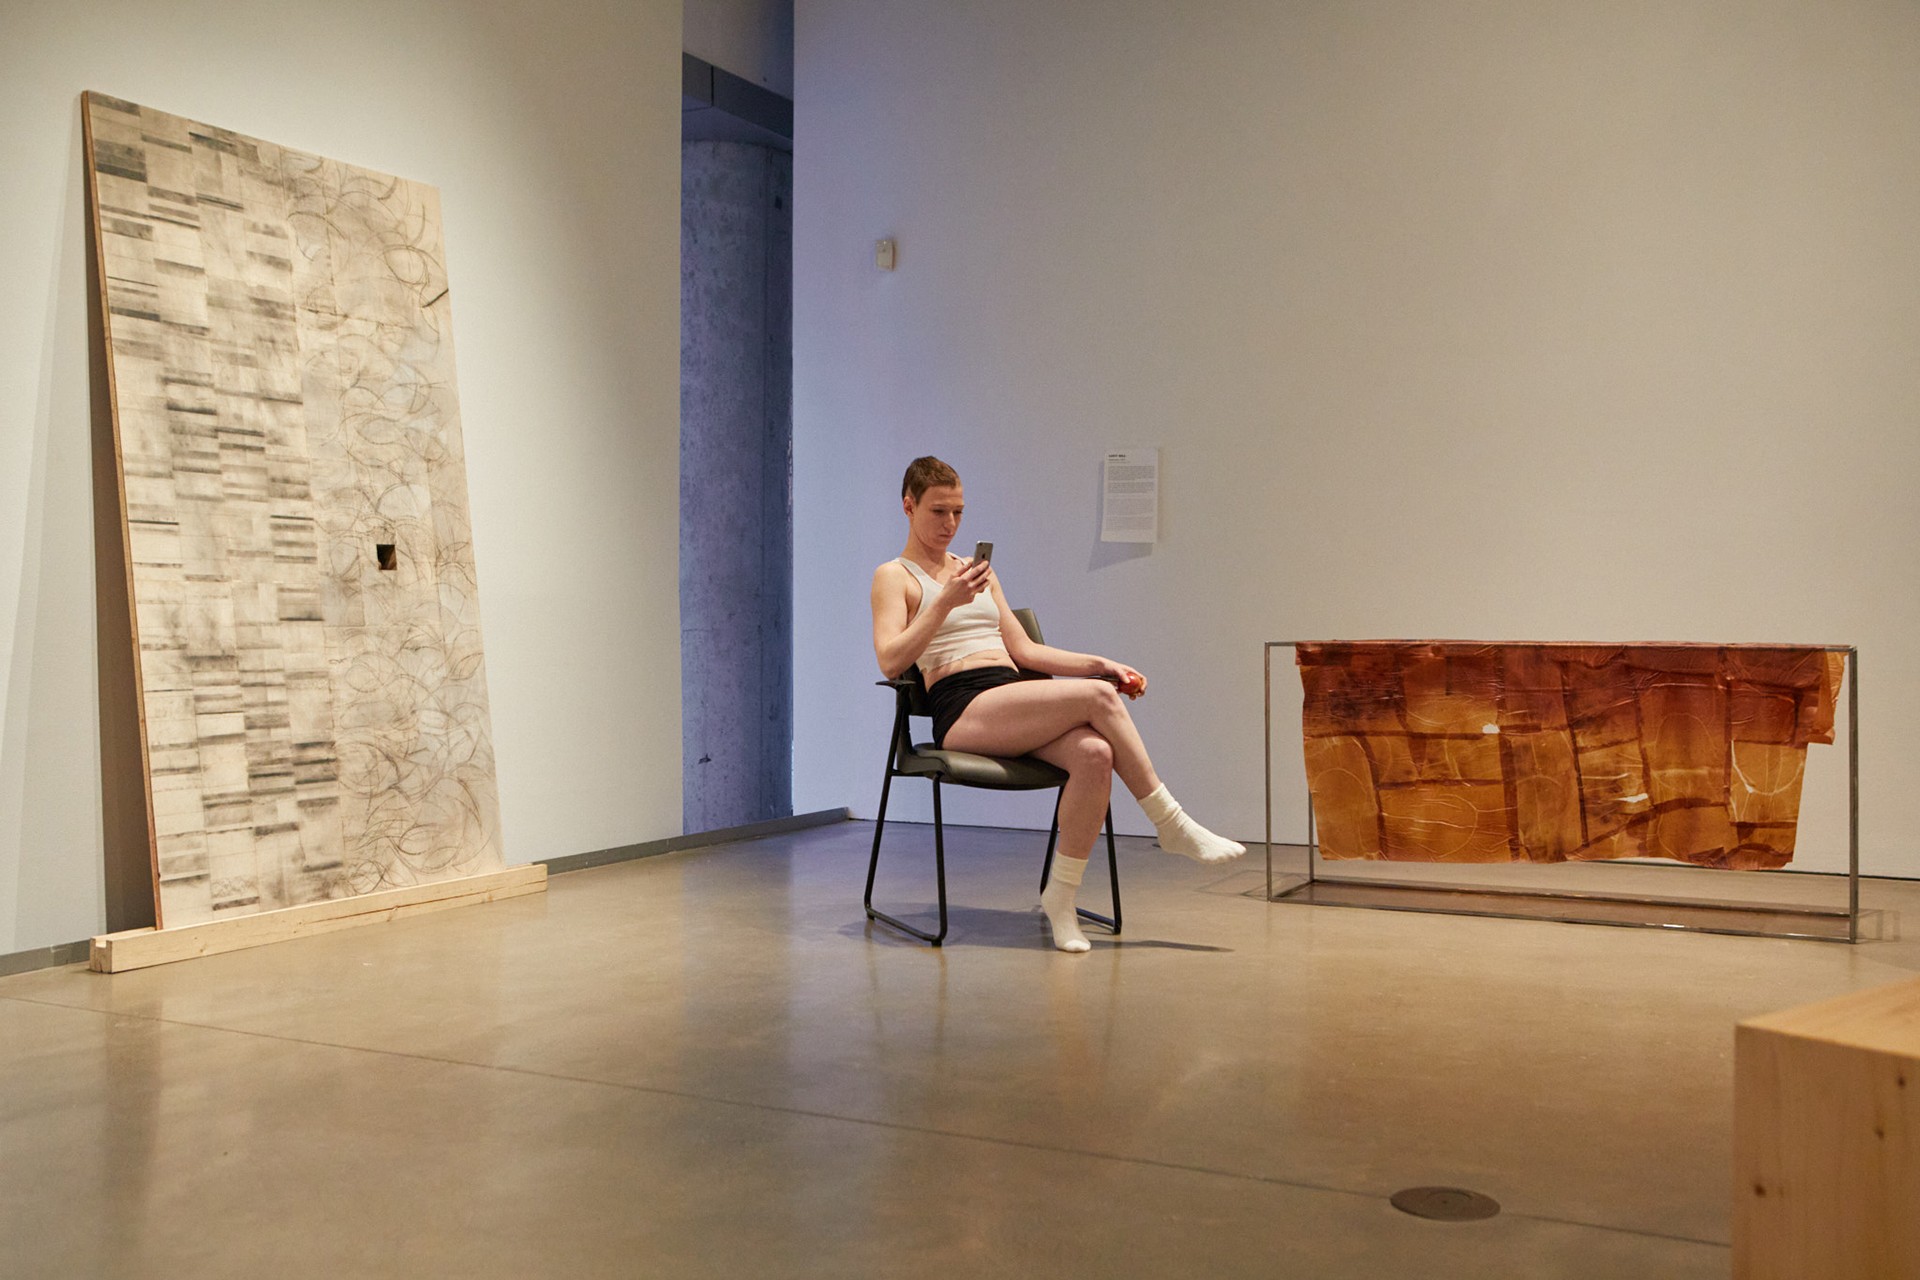 Anne-Marie Latulippe (a.k.a “Steel Toes”) is documented sitting next to  on a chair, holding a phone in their left hand and an apple in the right. She is filming the audience as they are circulating in the gallery space.